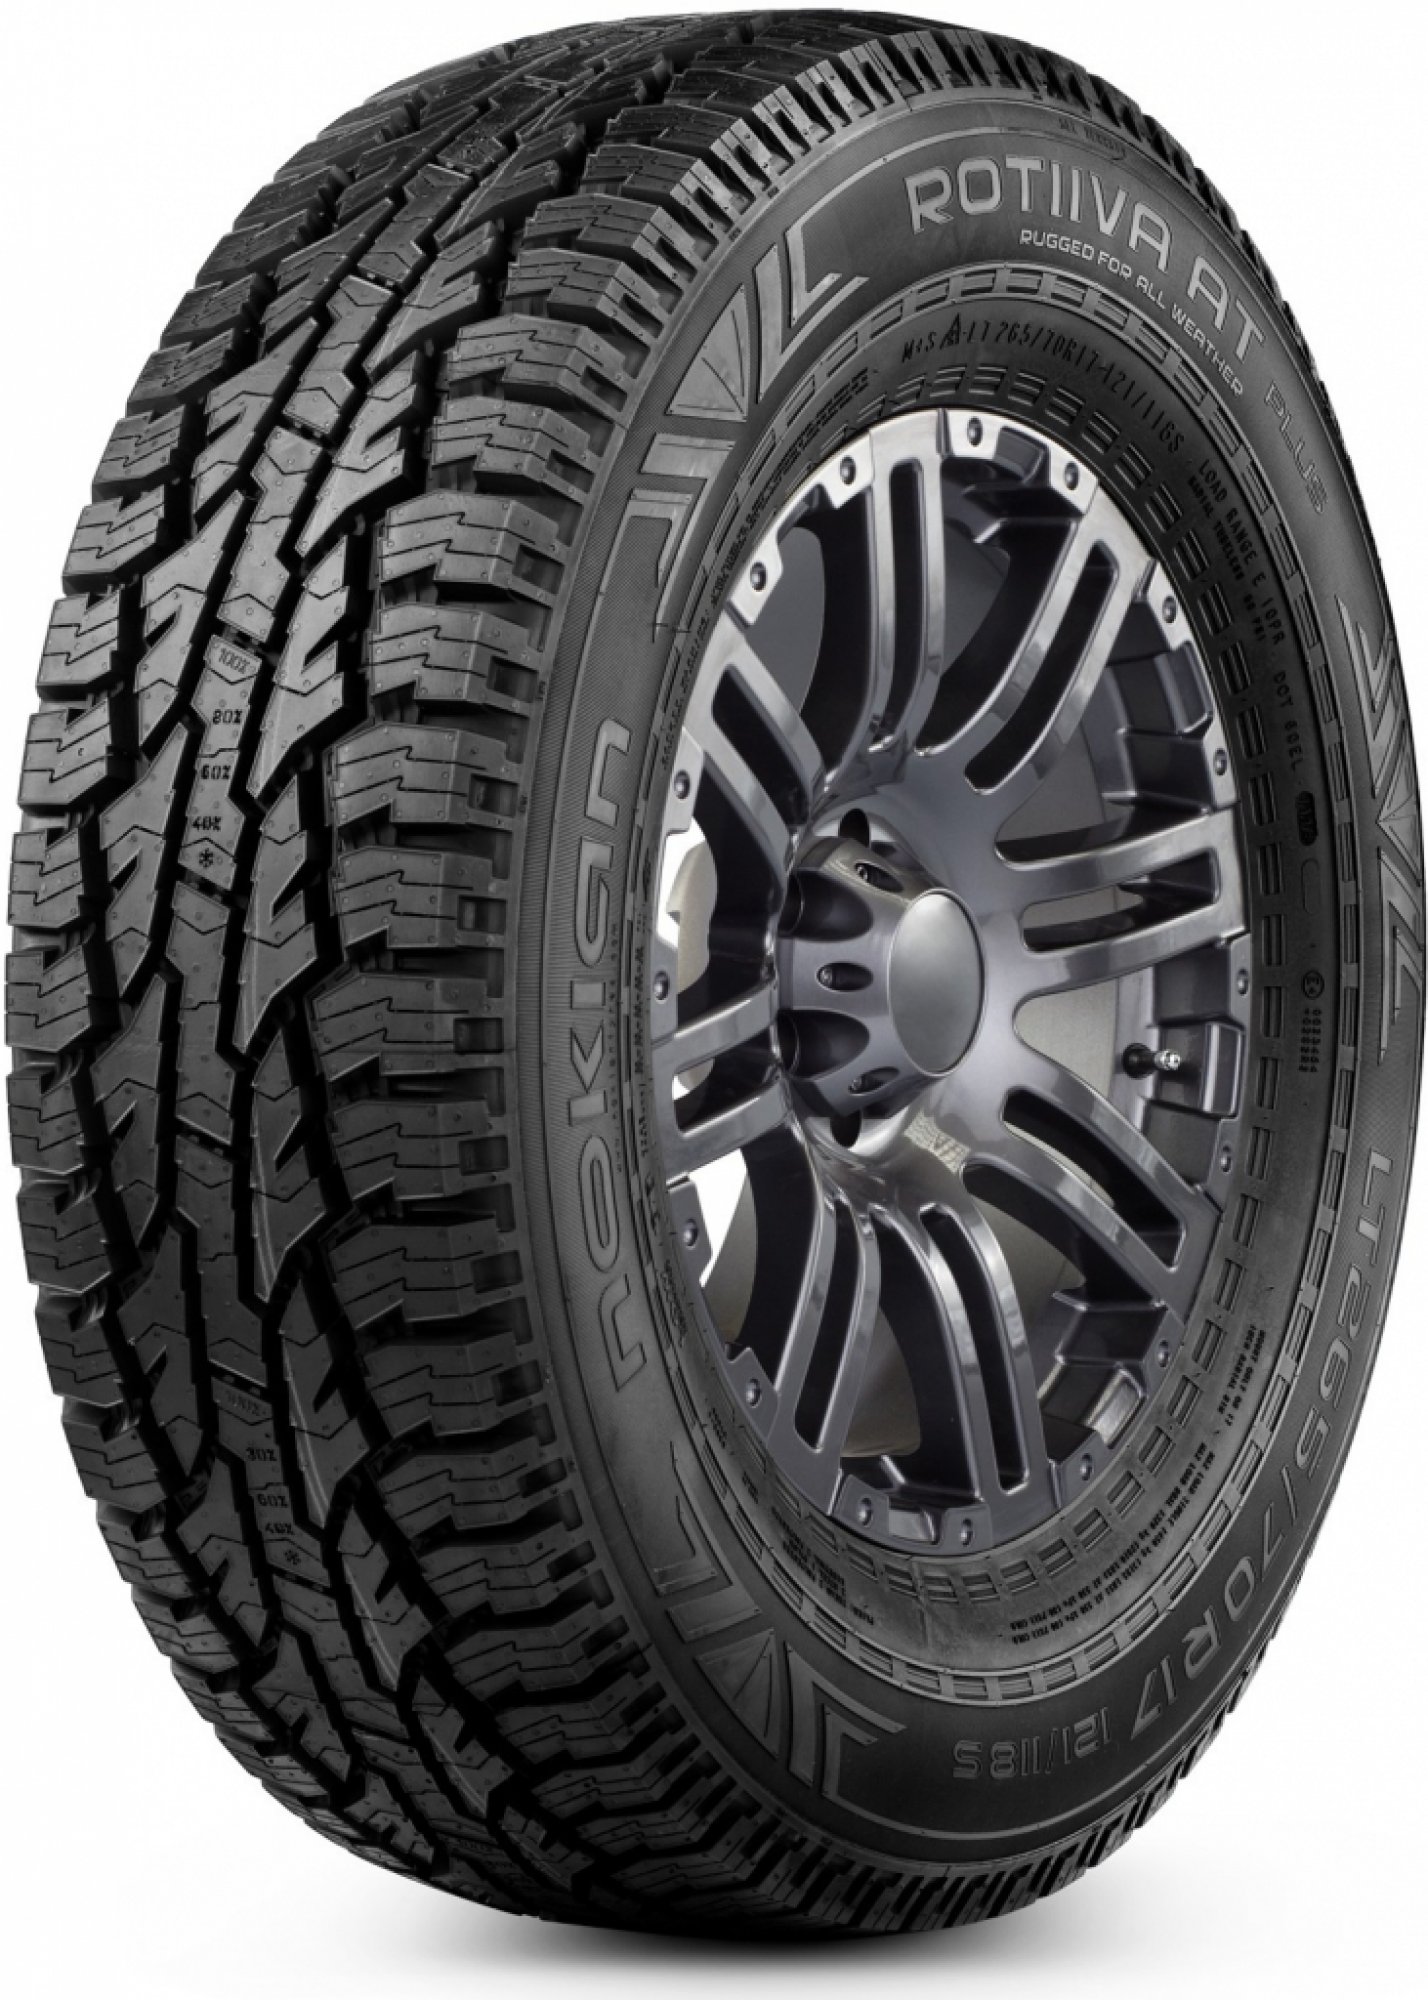 NOKIAN TYRES ROTIIVA AT PLUS 275/70 R 18 125/122S